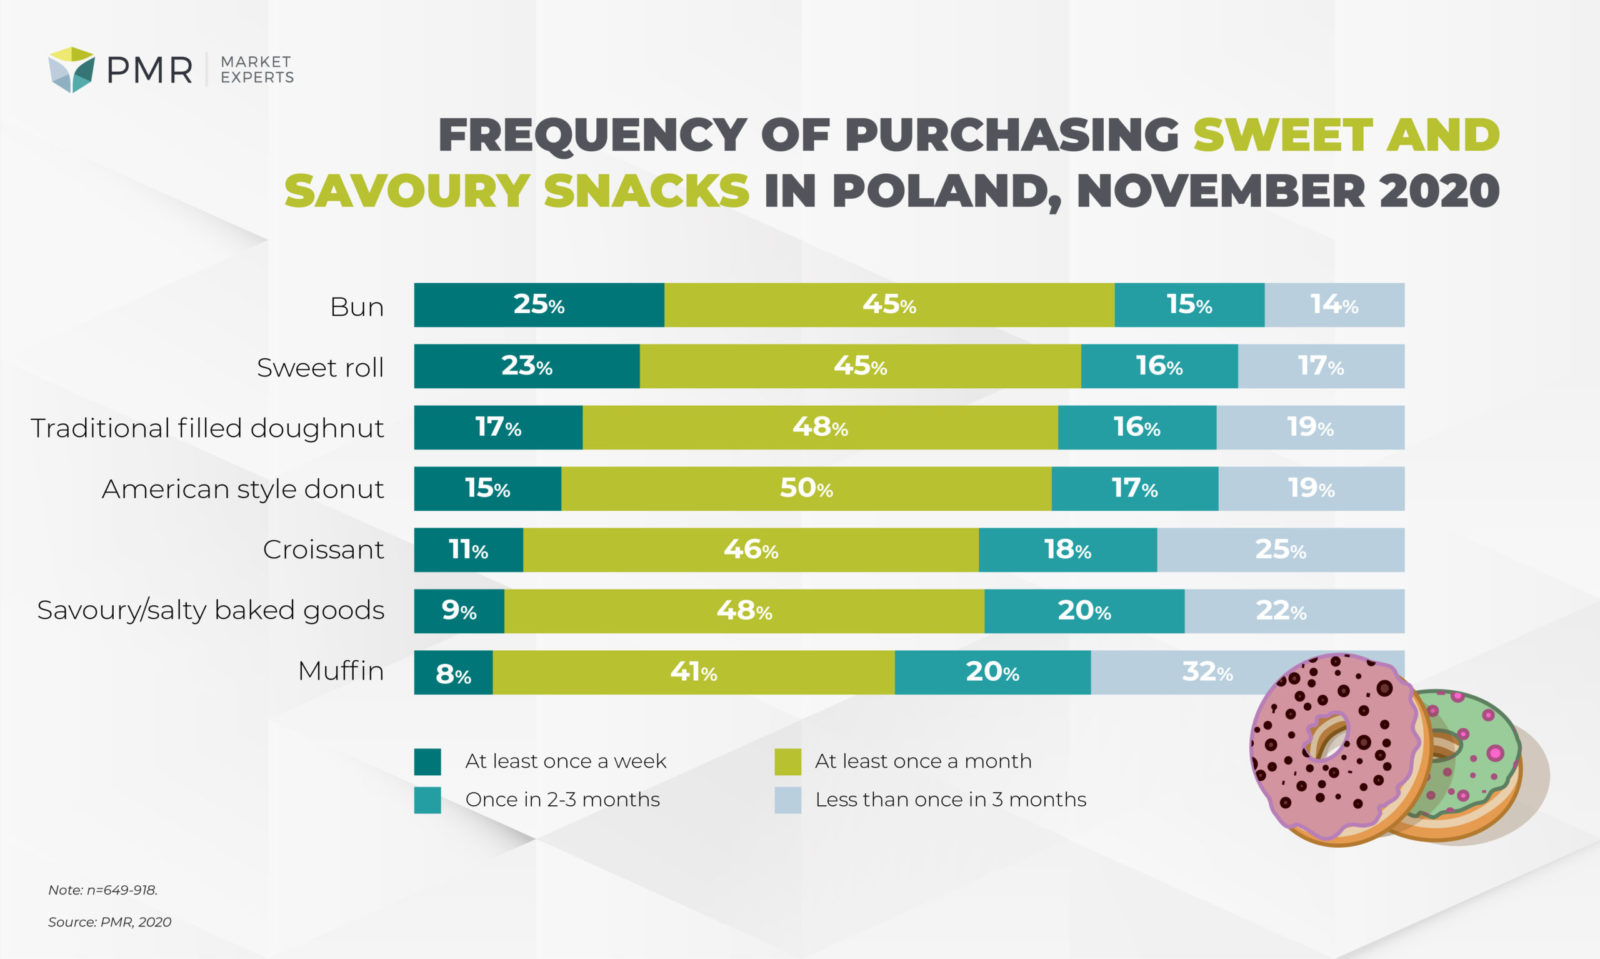 Frequency of purchasing sweet and savory baked snacks in Polans